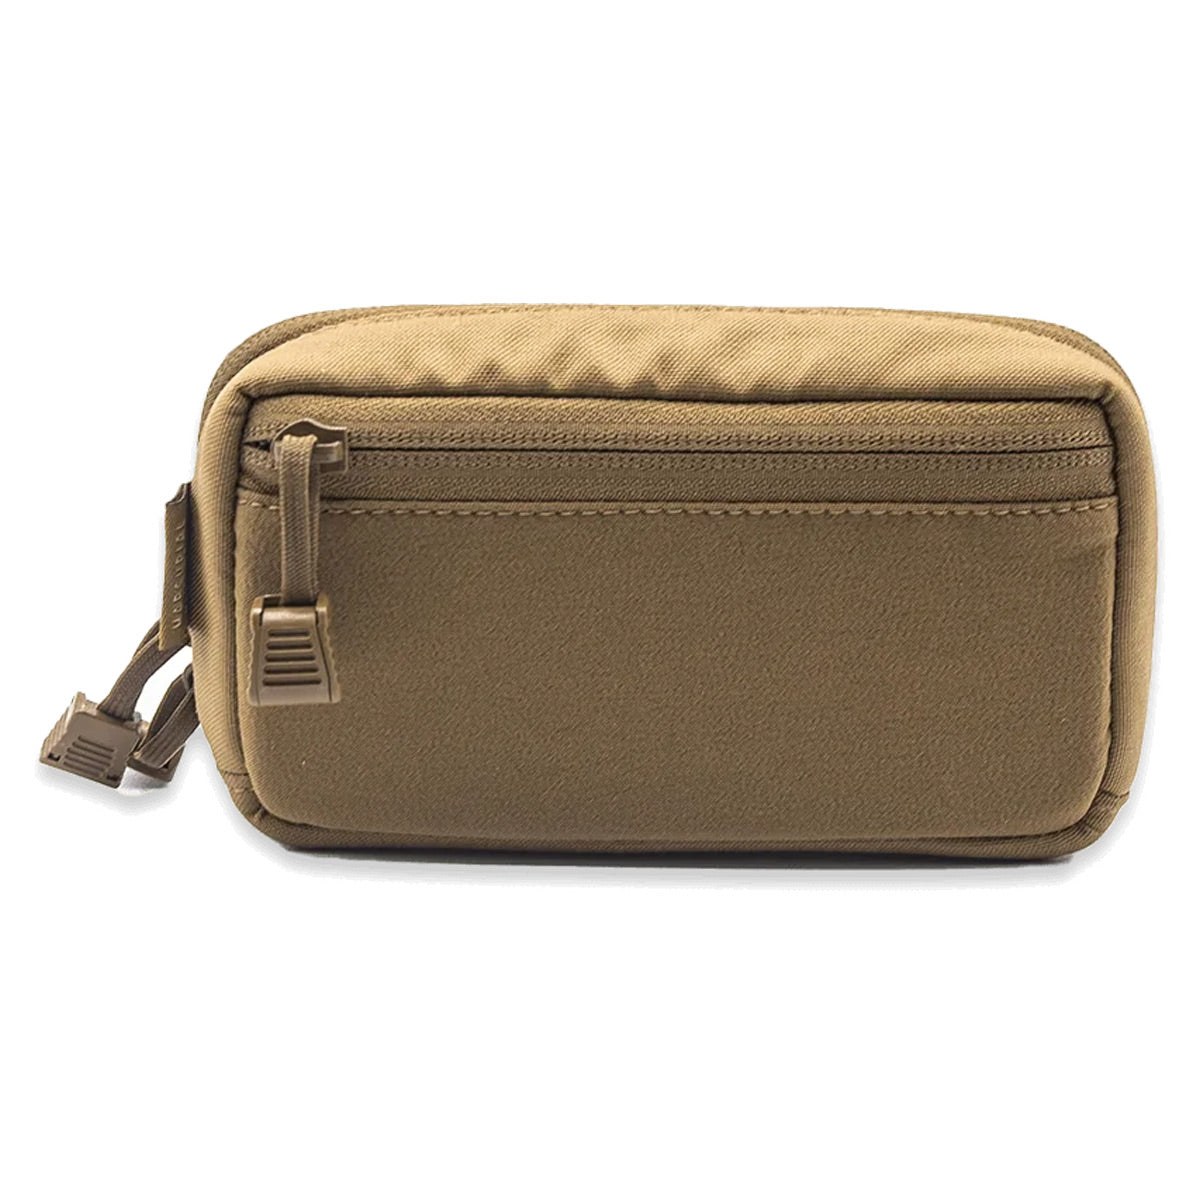 Marsupial Gear Down Under Pouch in  by GOHUNT | Marsupial Gear - GOHUNT Shop